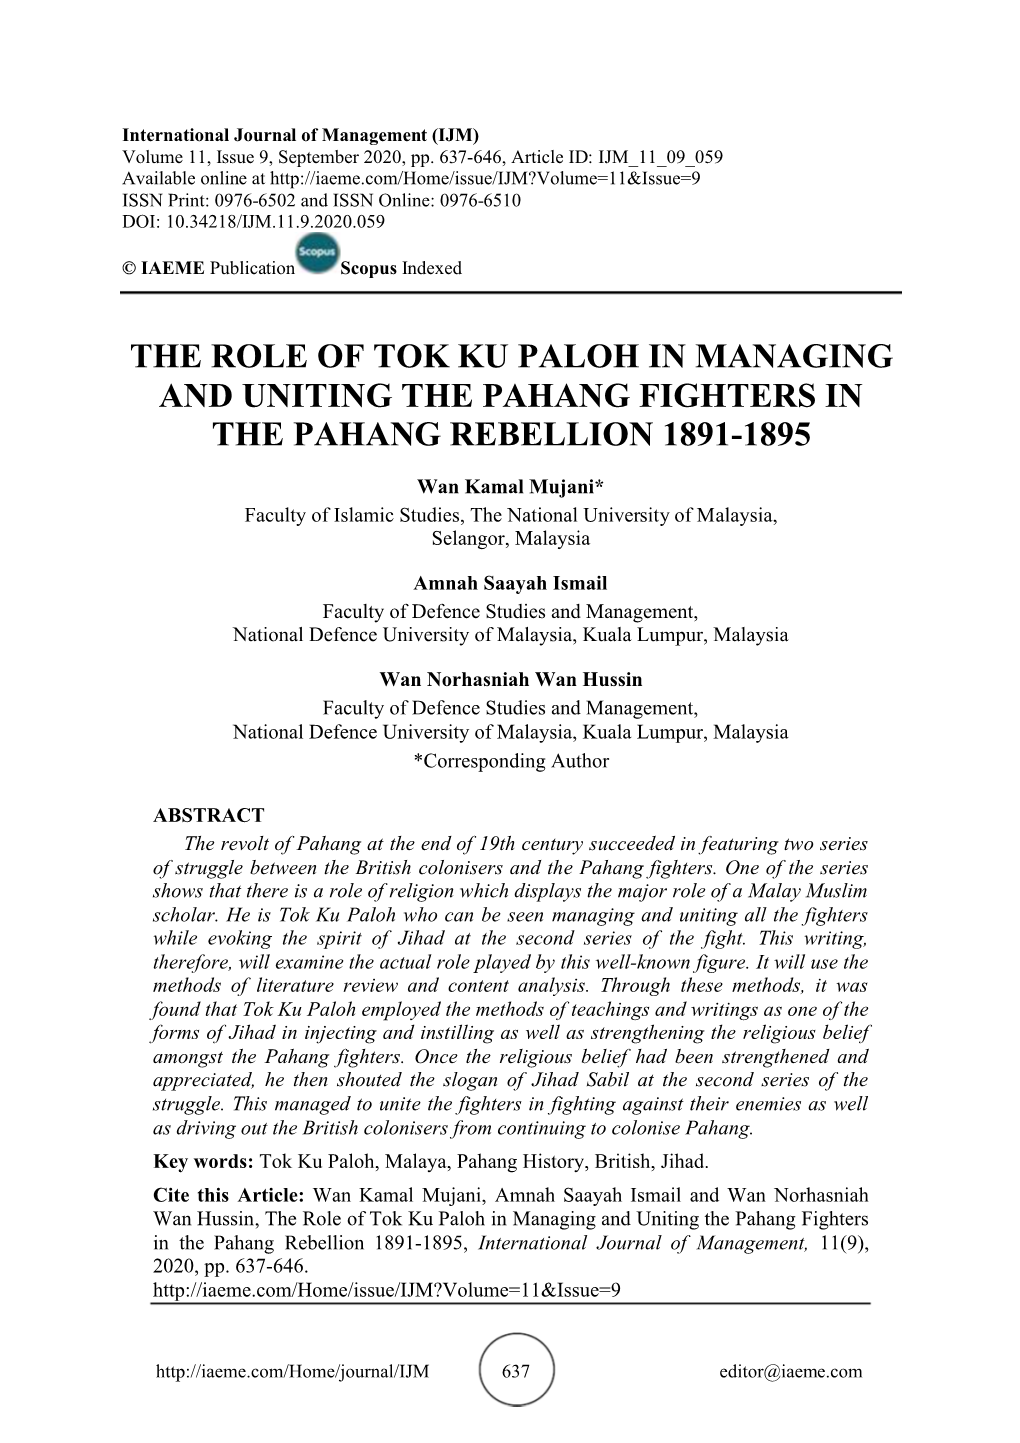 The Role of Tok Ku Paloh in Managing and Uniting the Pahang Fighters in the Pahang Rebellion 1891-1895